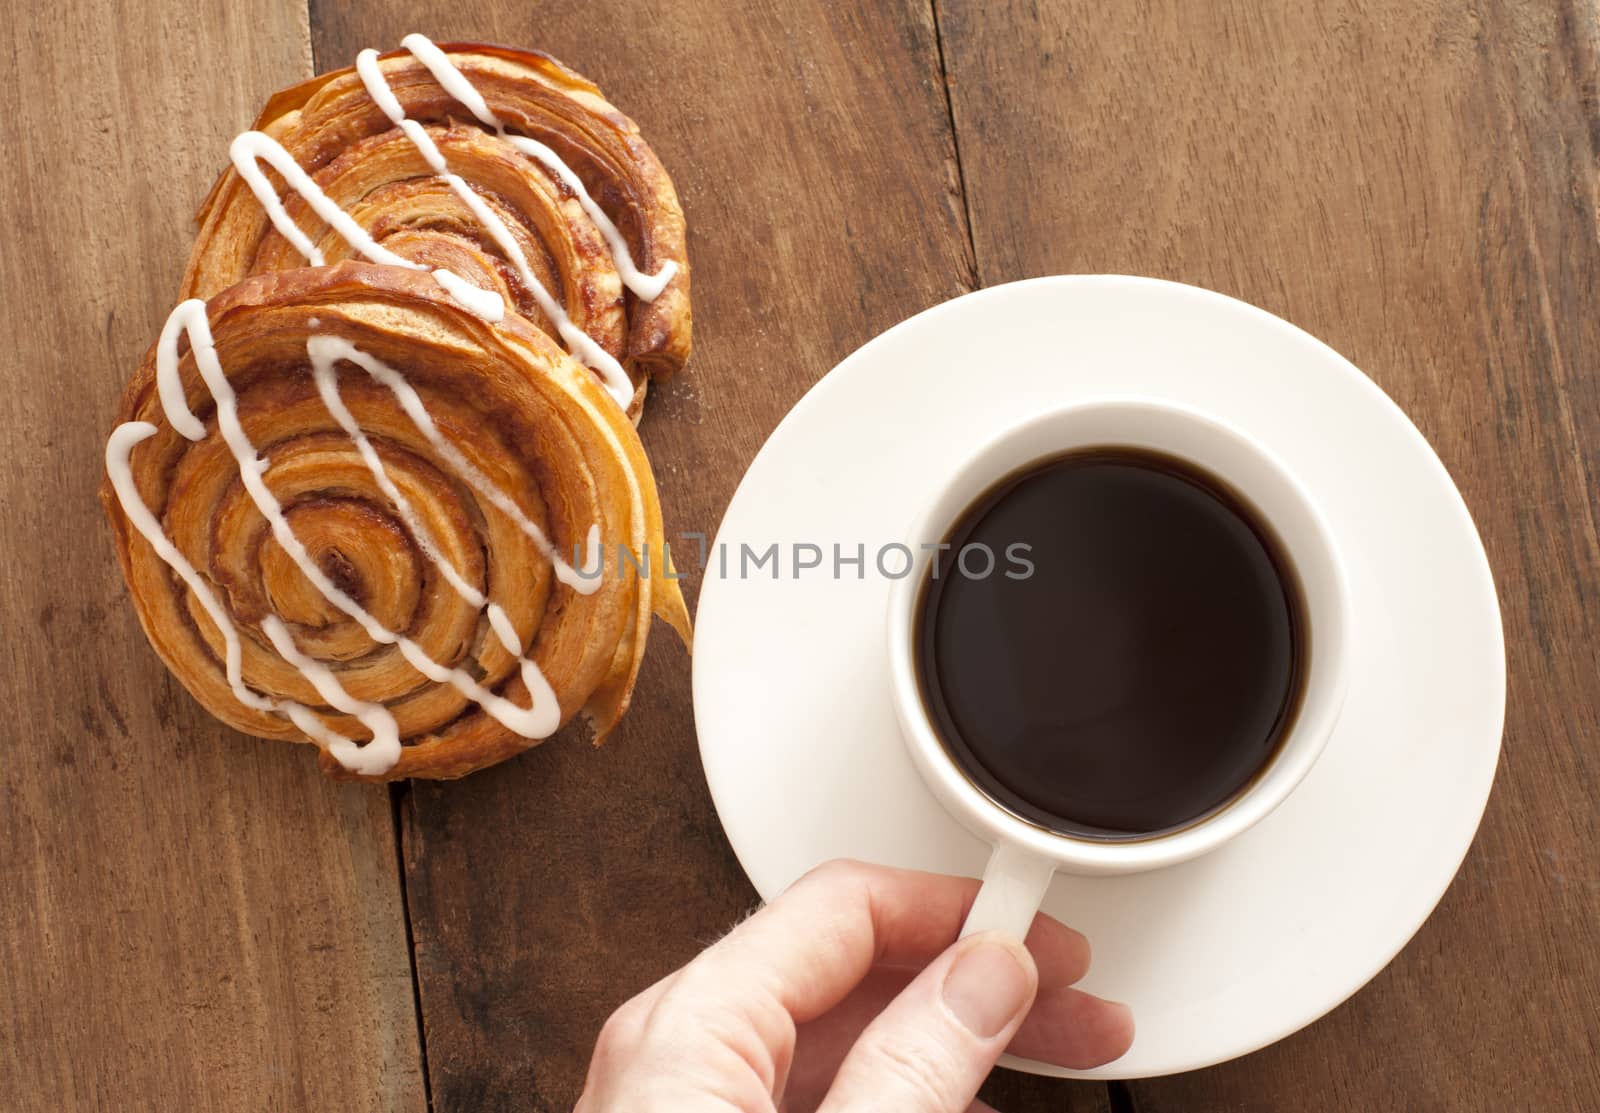 Coffee with fresh Danish pastries by stockarch